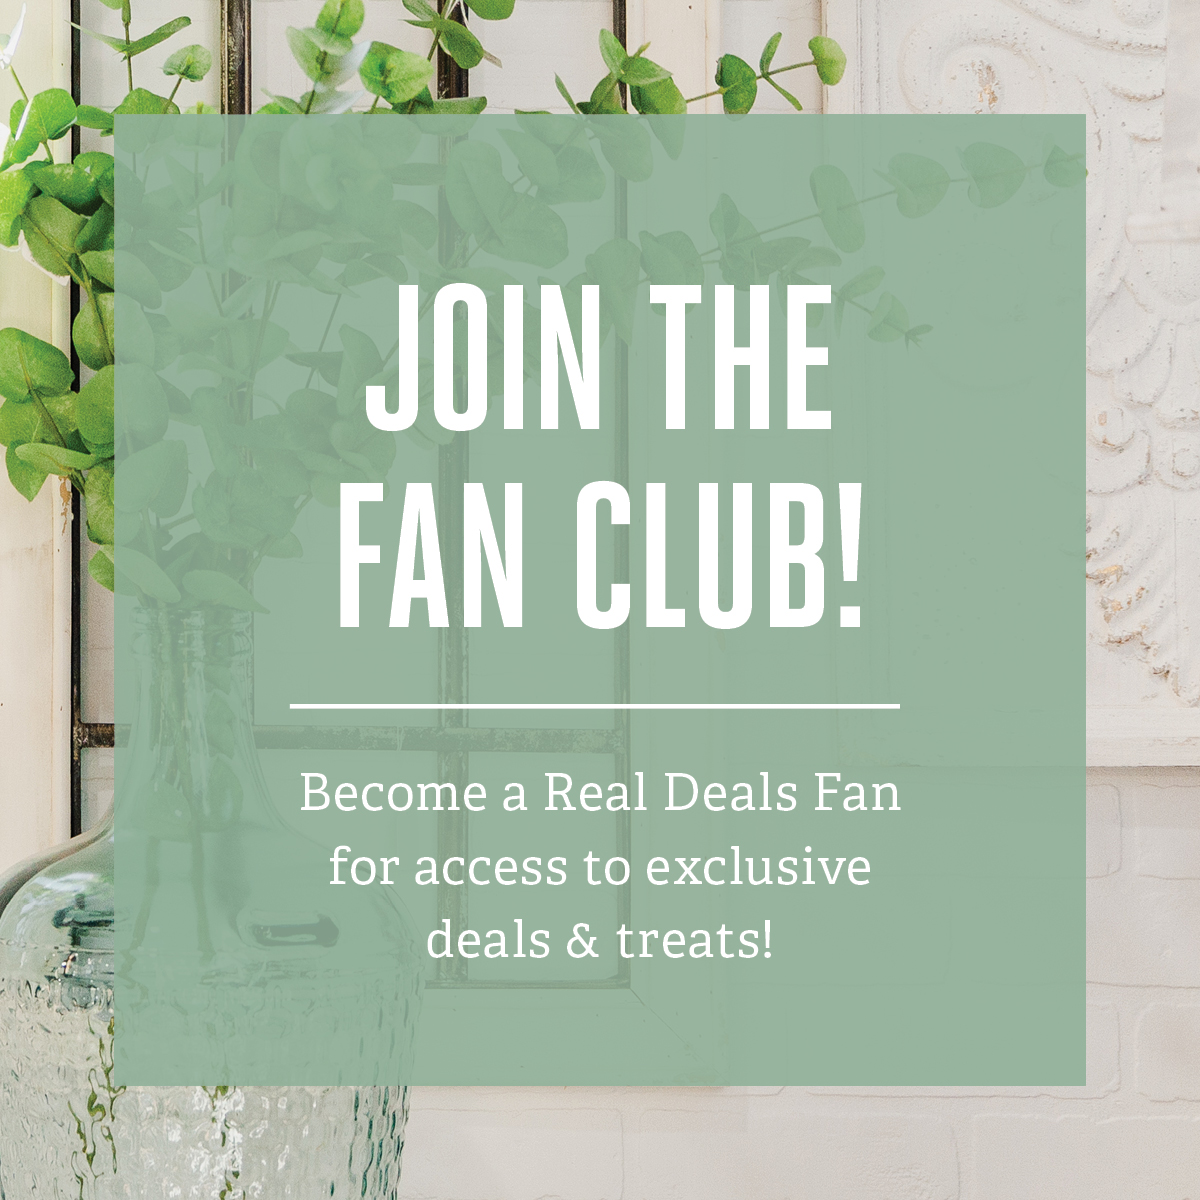 Join the Real Deals fan club